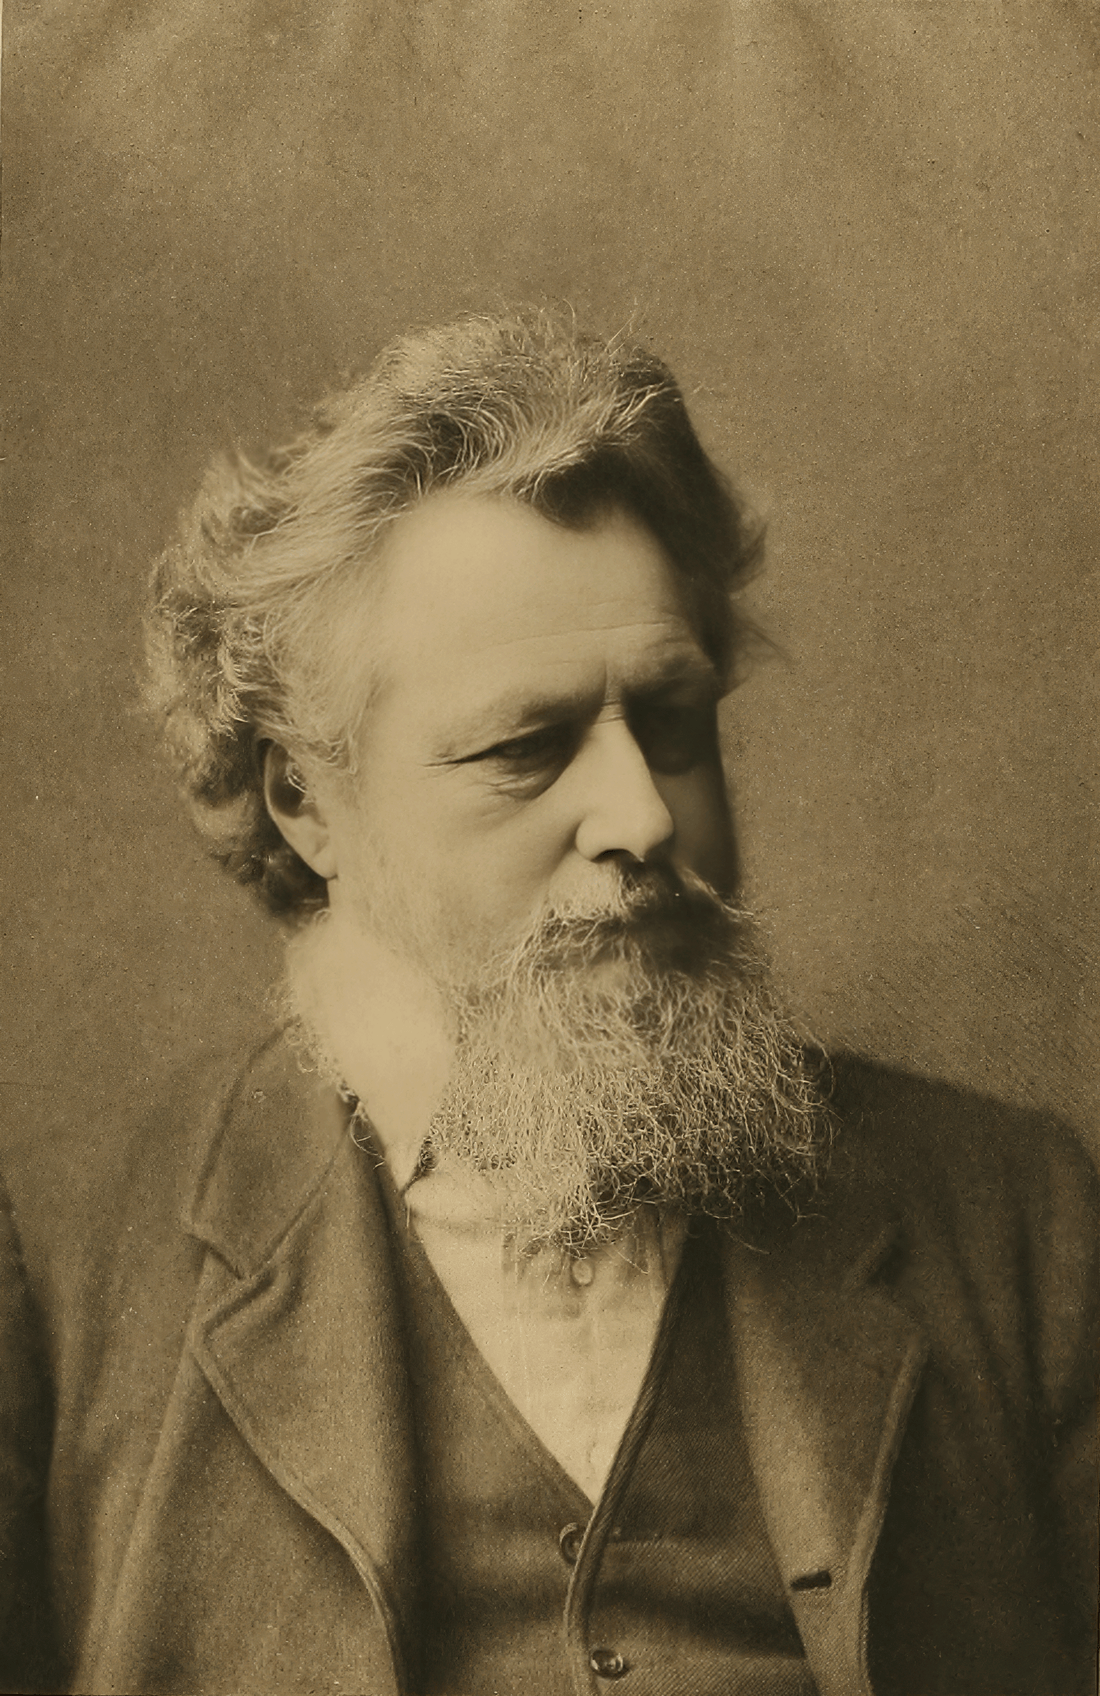 Description: This image depicts William Morris, a prominent artist, craftsman, and textile designer from the Victorian era.